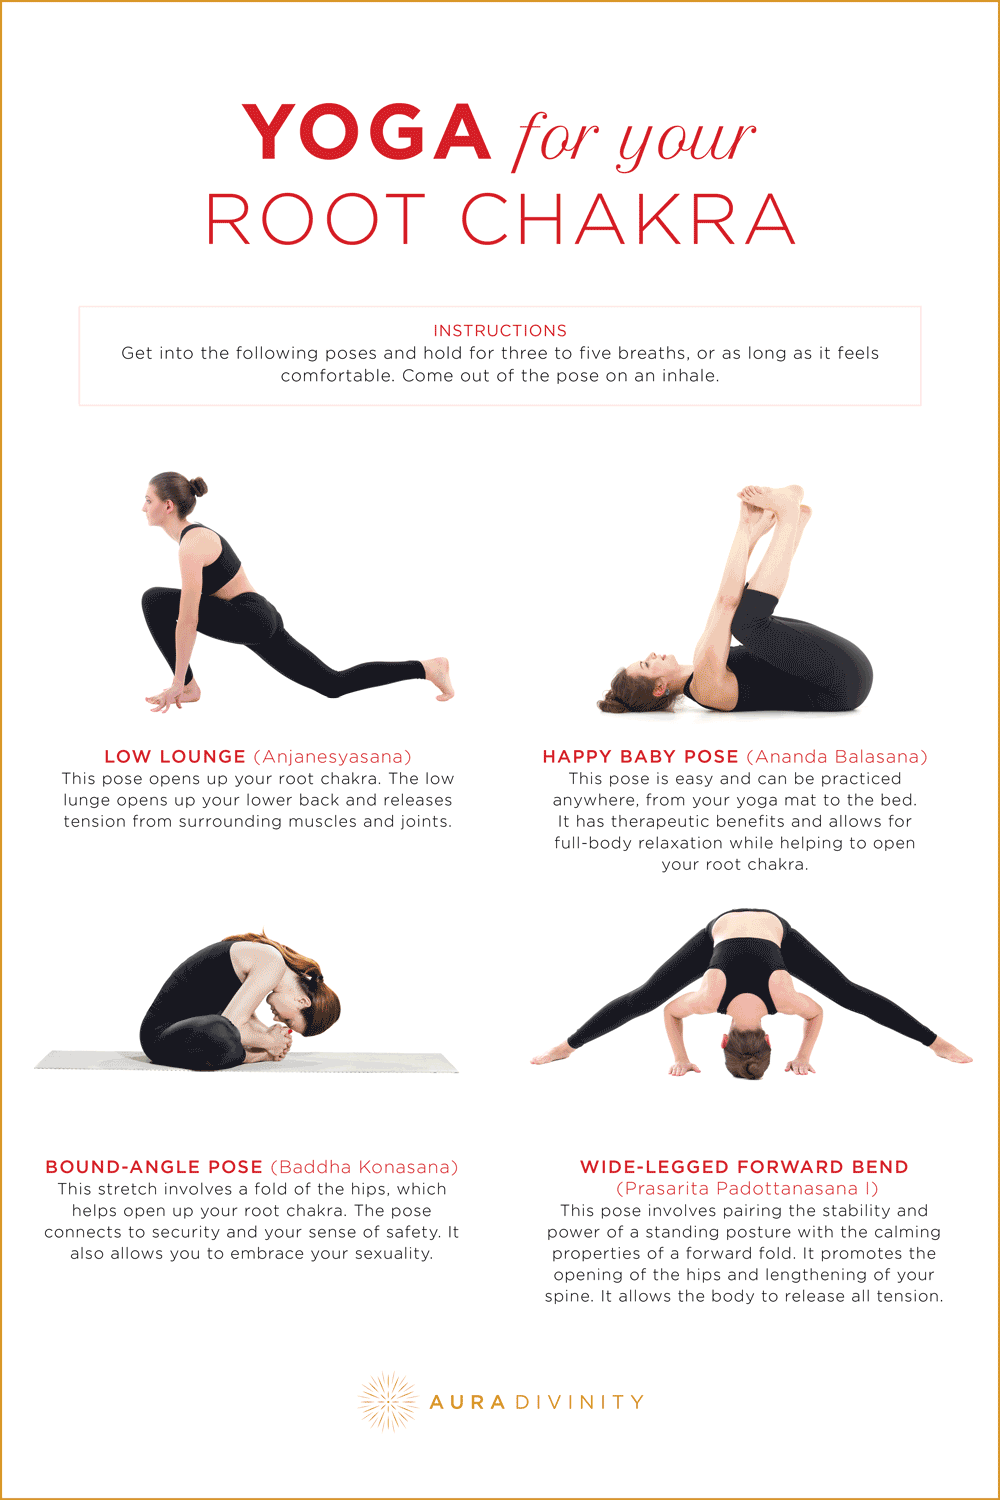 3 Simple Yoga Poses To Balance Your Root Chakra